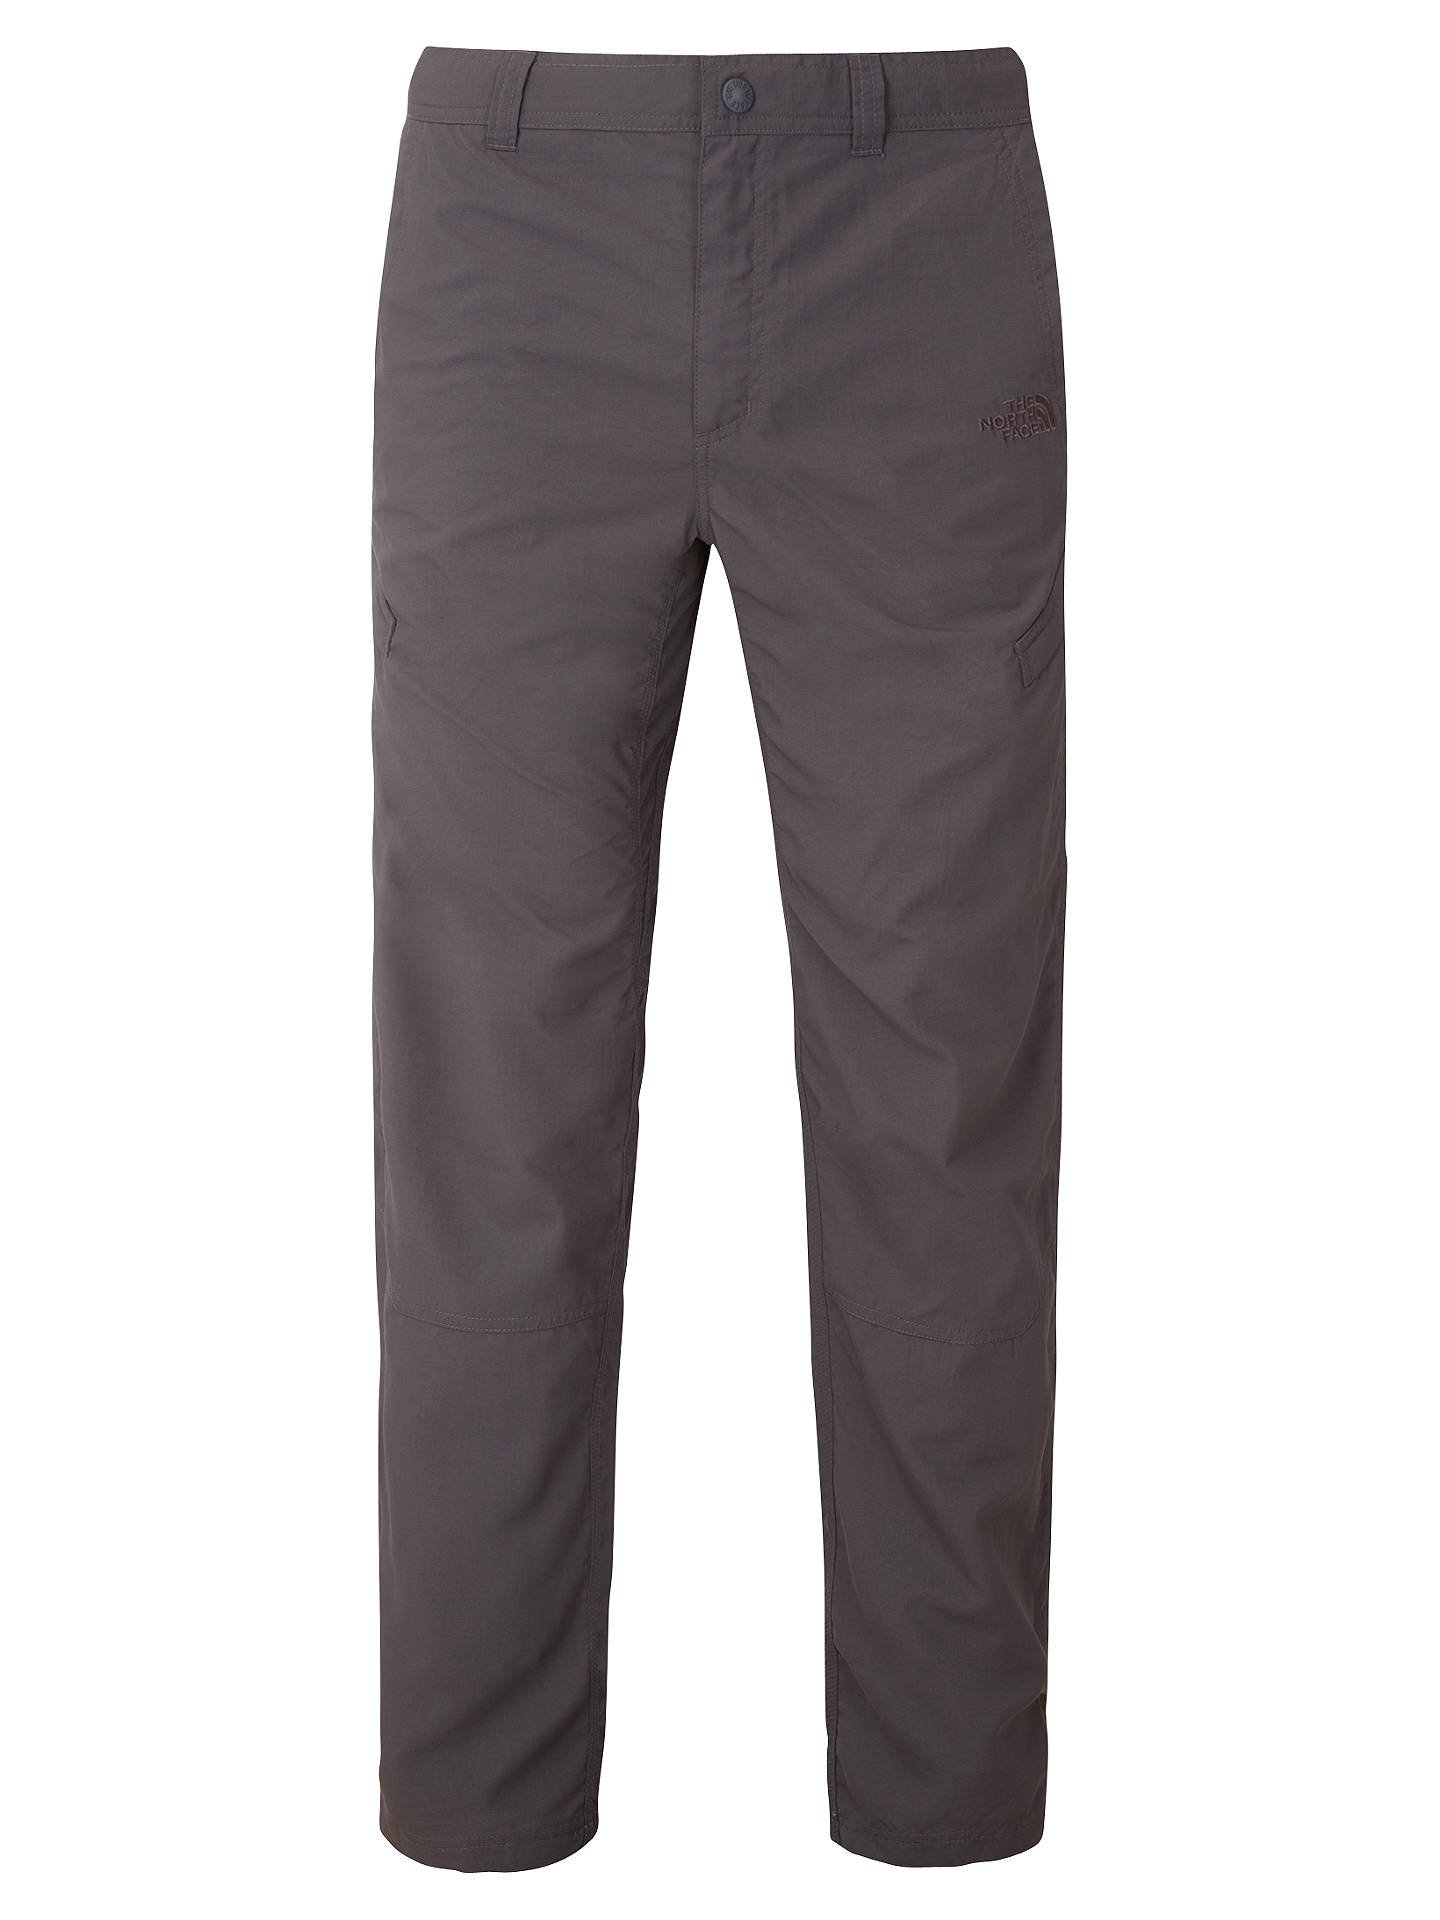 north face trousers men